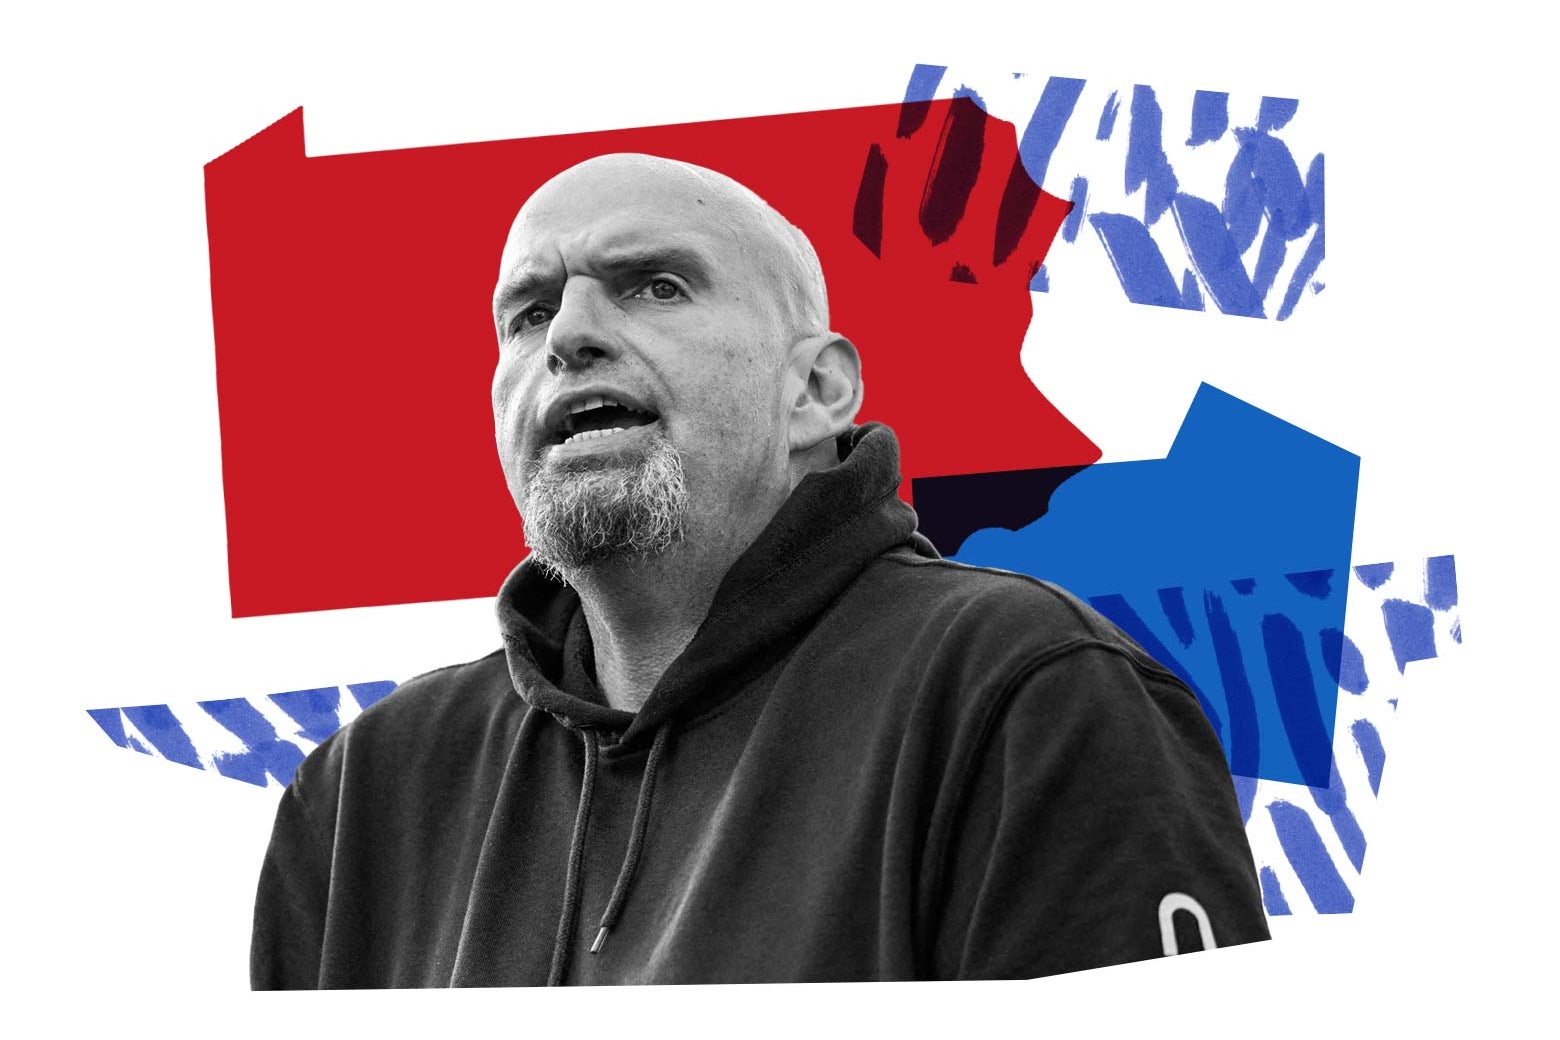 John Fetterman seen in front of multicolored shapes, including a red-filled outline of Pennsylvania